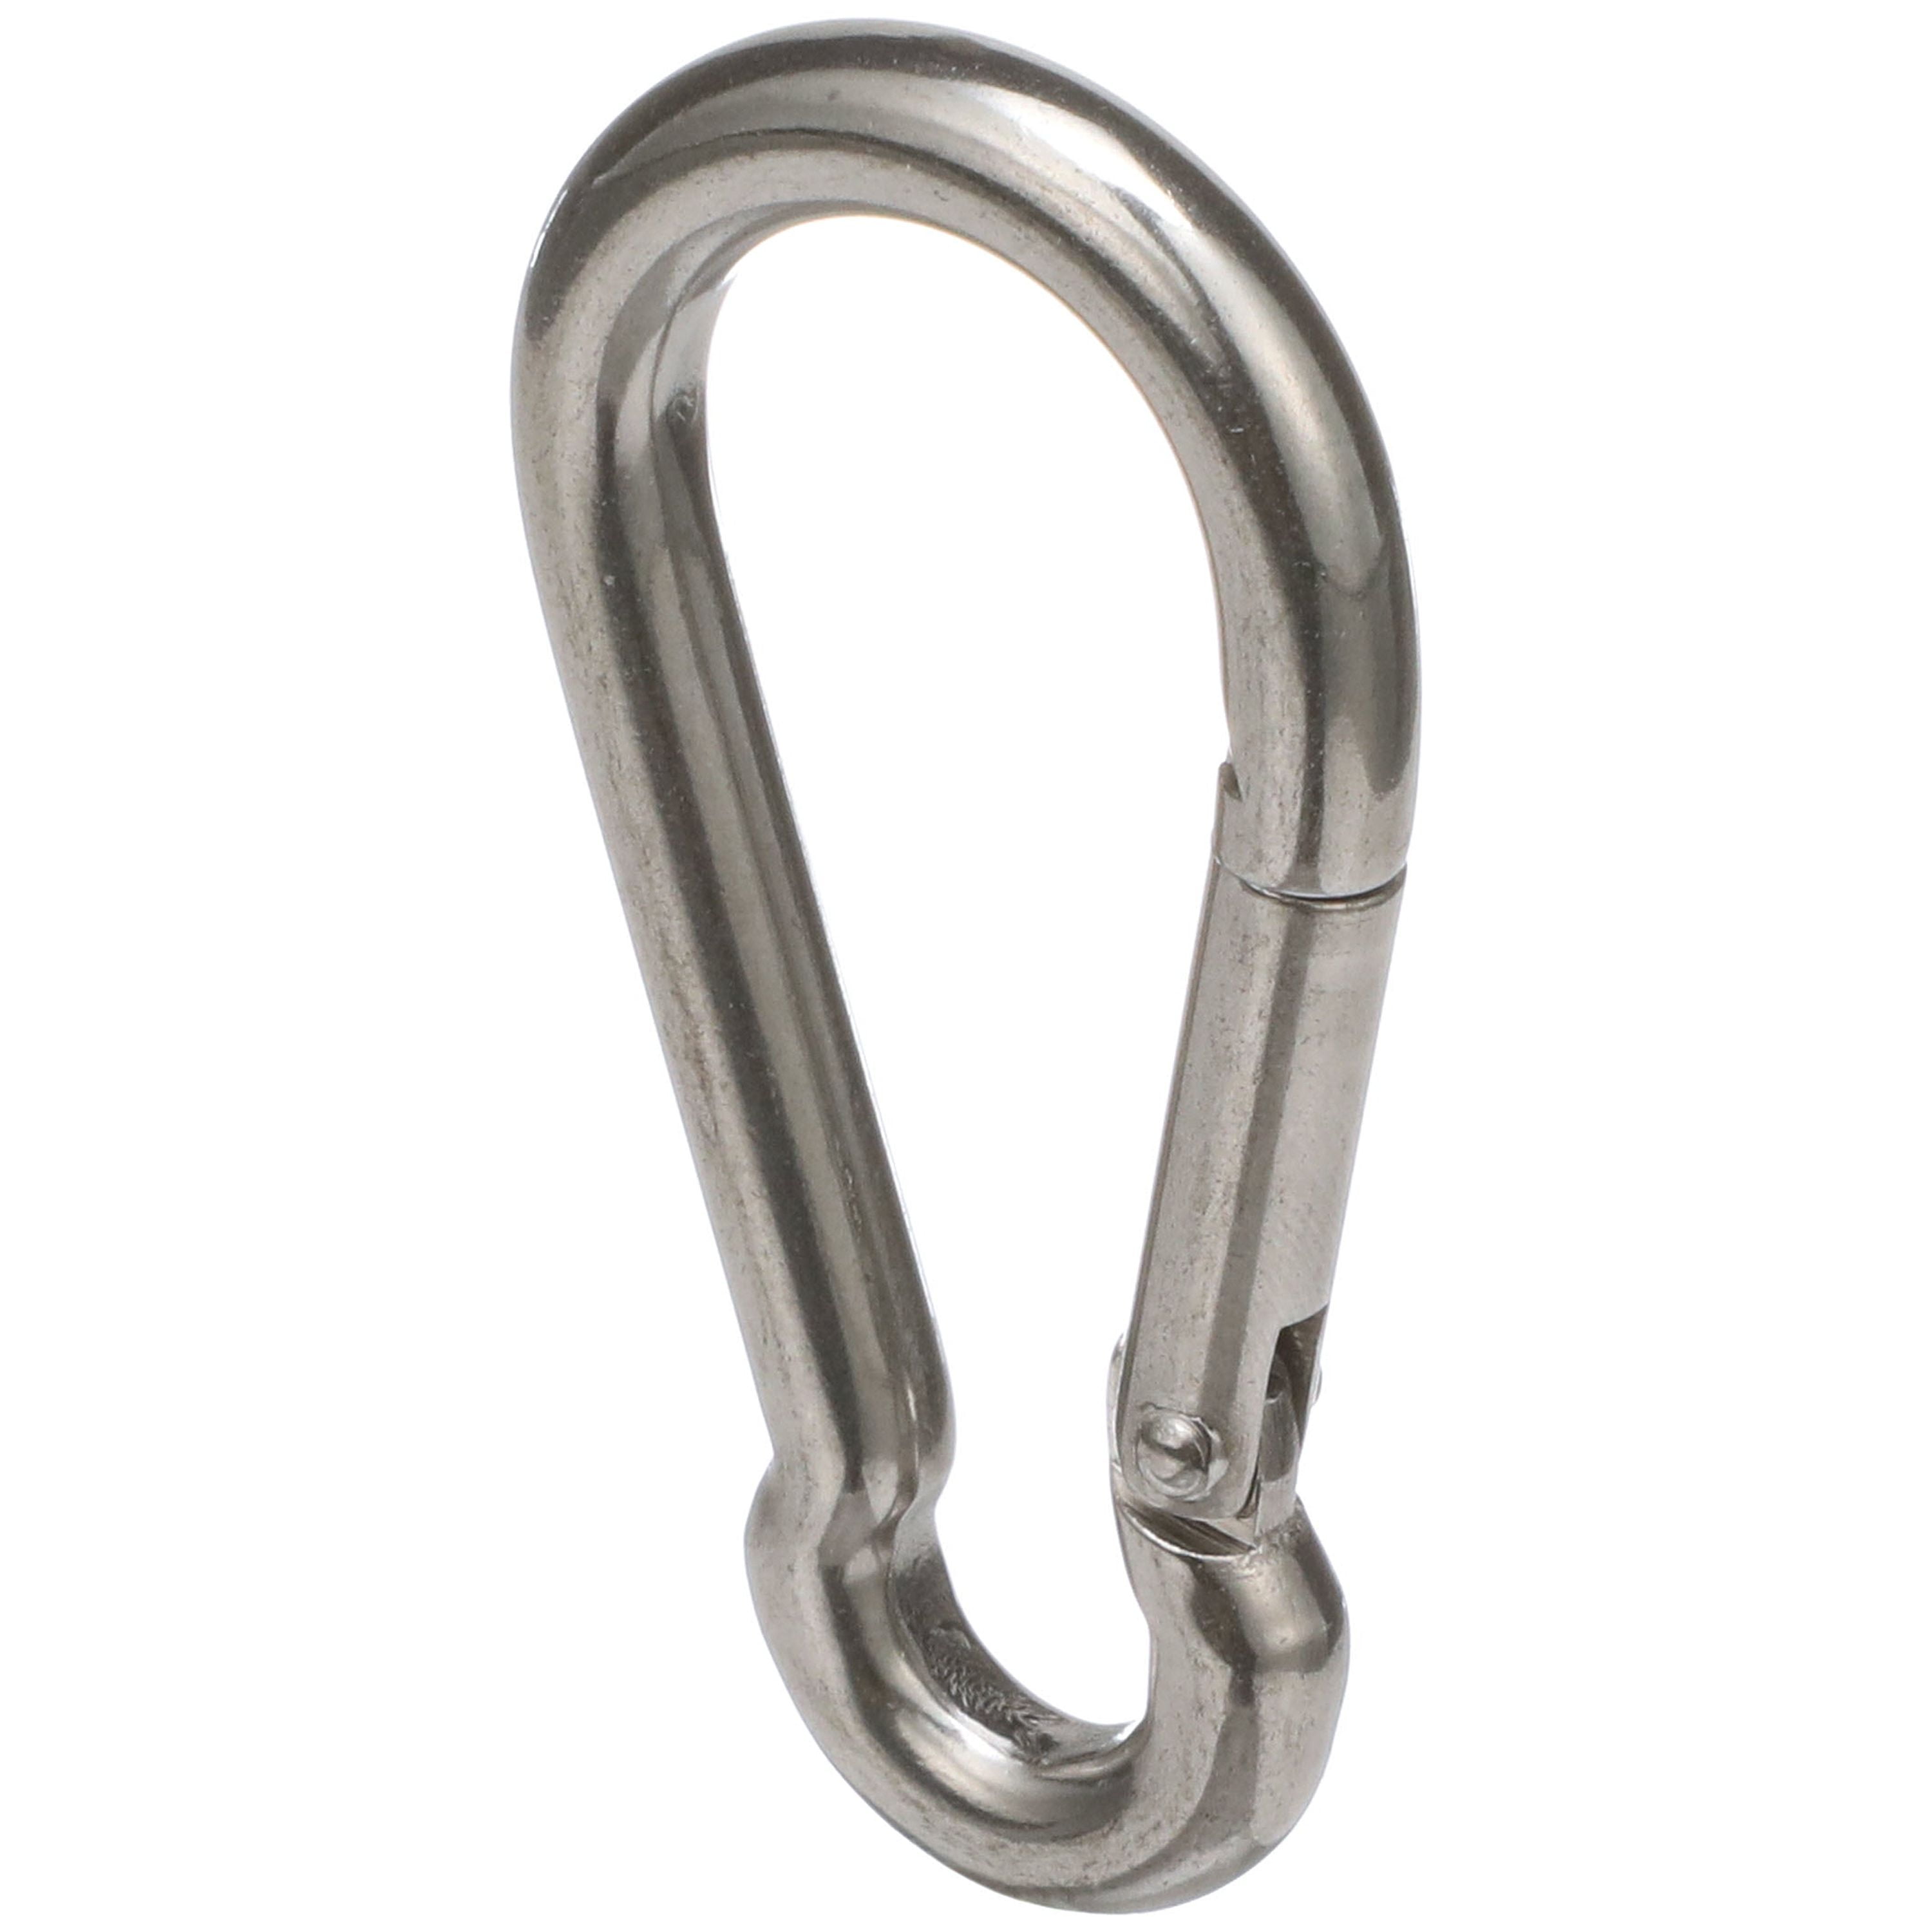 Boat Hook, 28mm Stainless Steel Marine Boat Hook Head Floating Hook for  Yachts for Extension Pole,Durable,Rust-Resistant Boat Hook Replacement